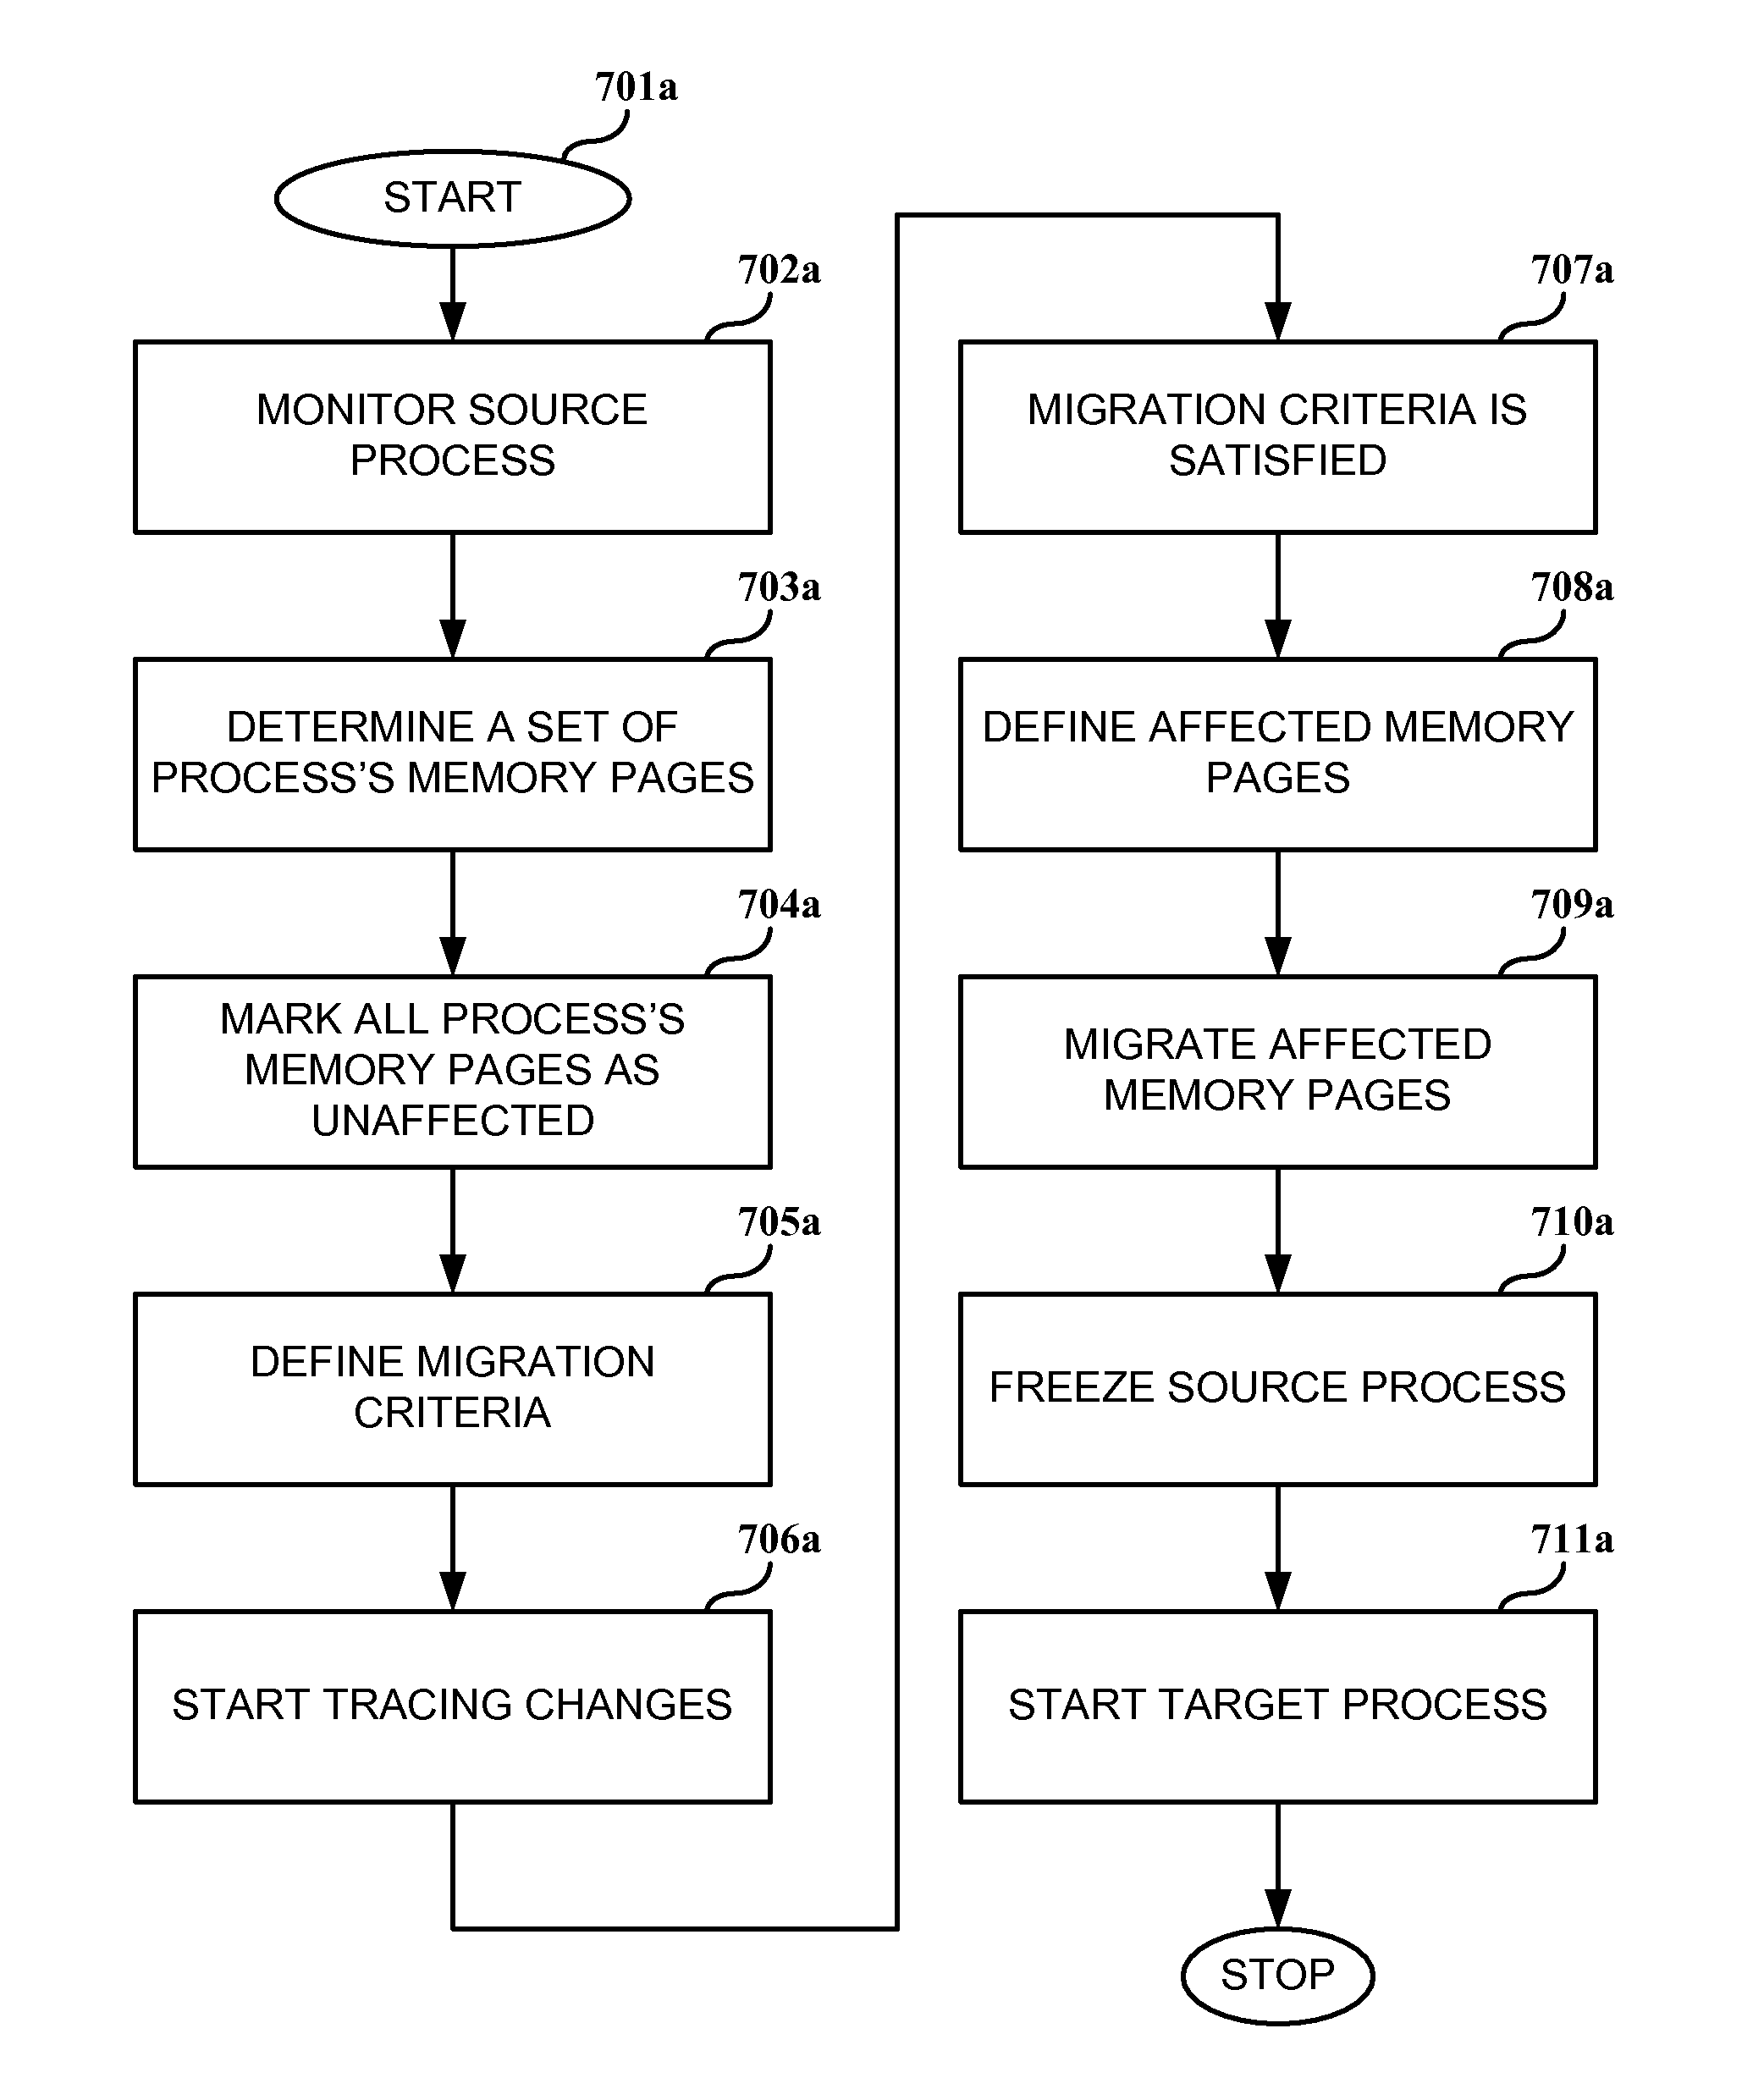 System, method and computer program product for process migration with planned minimized down-time